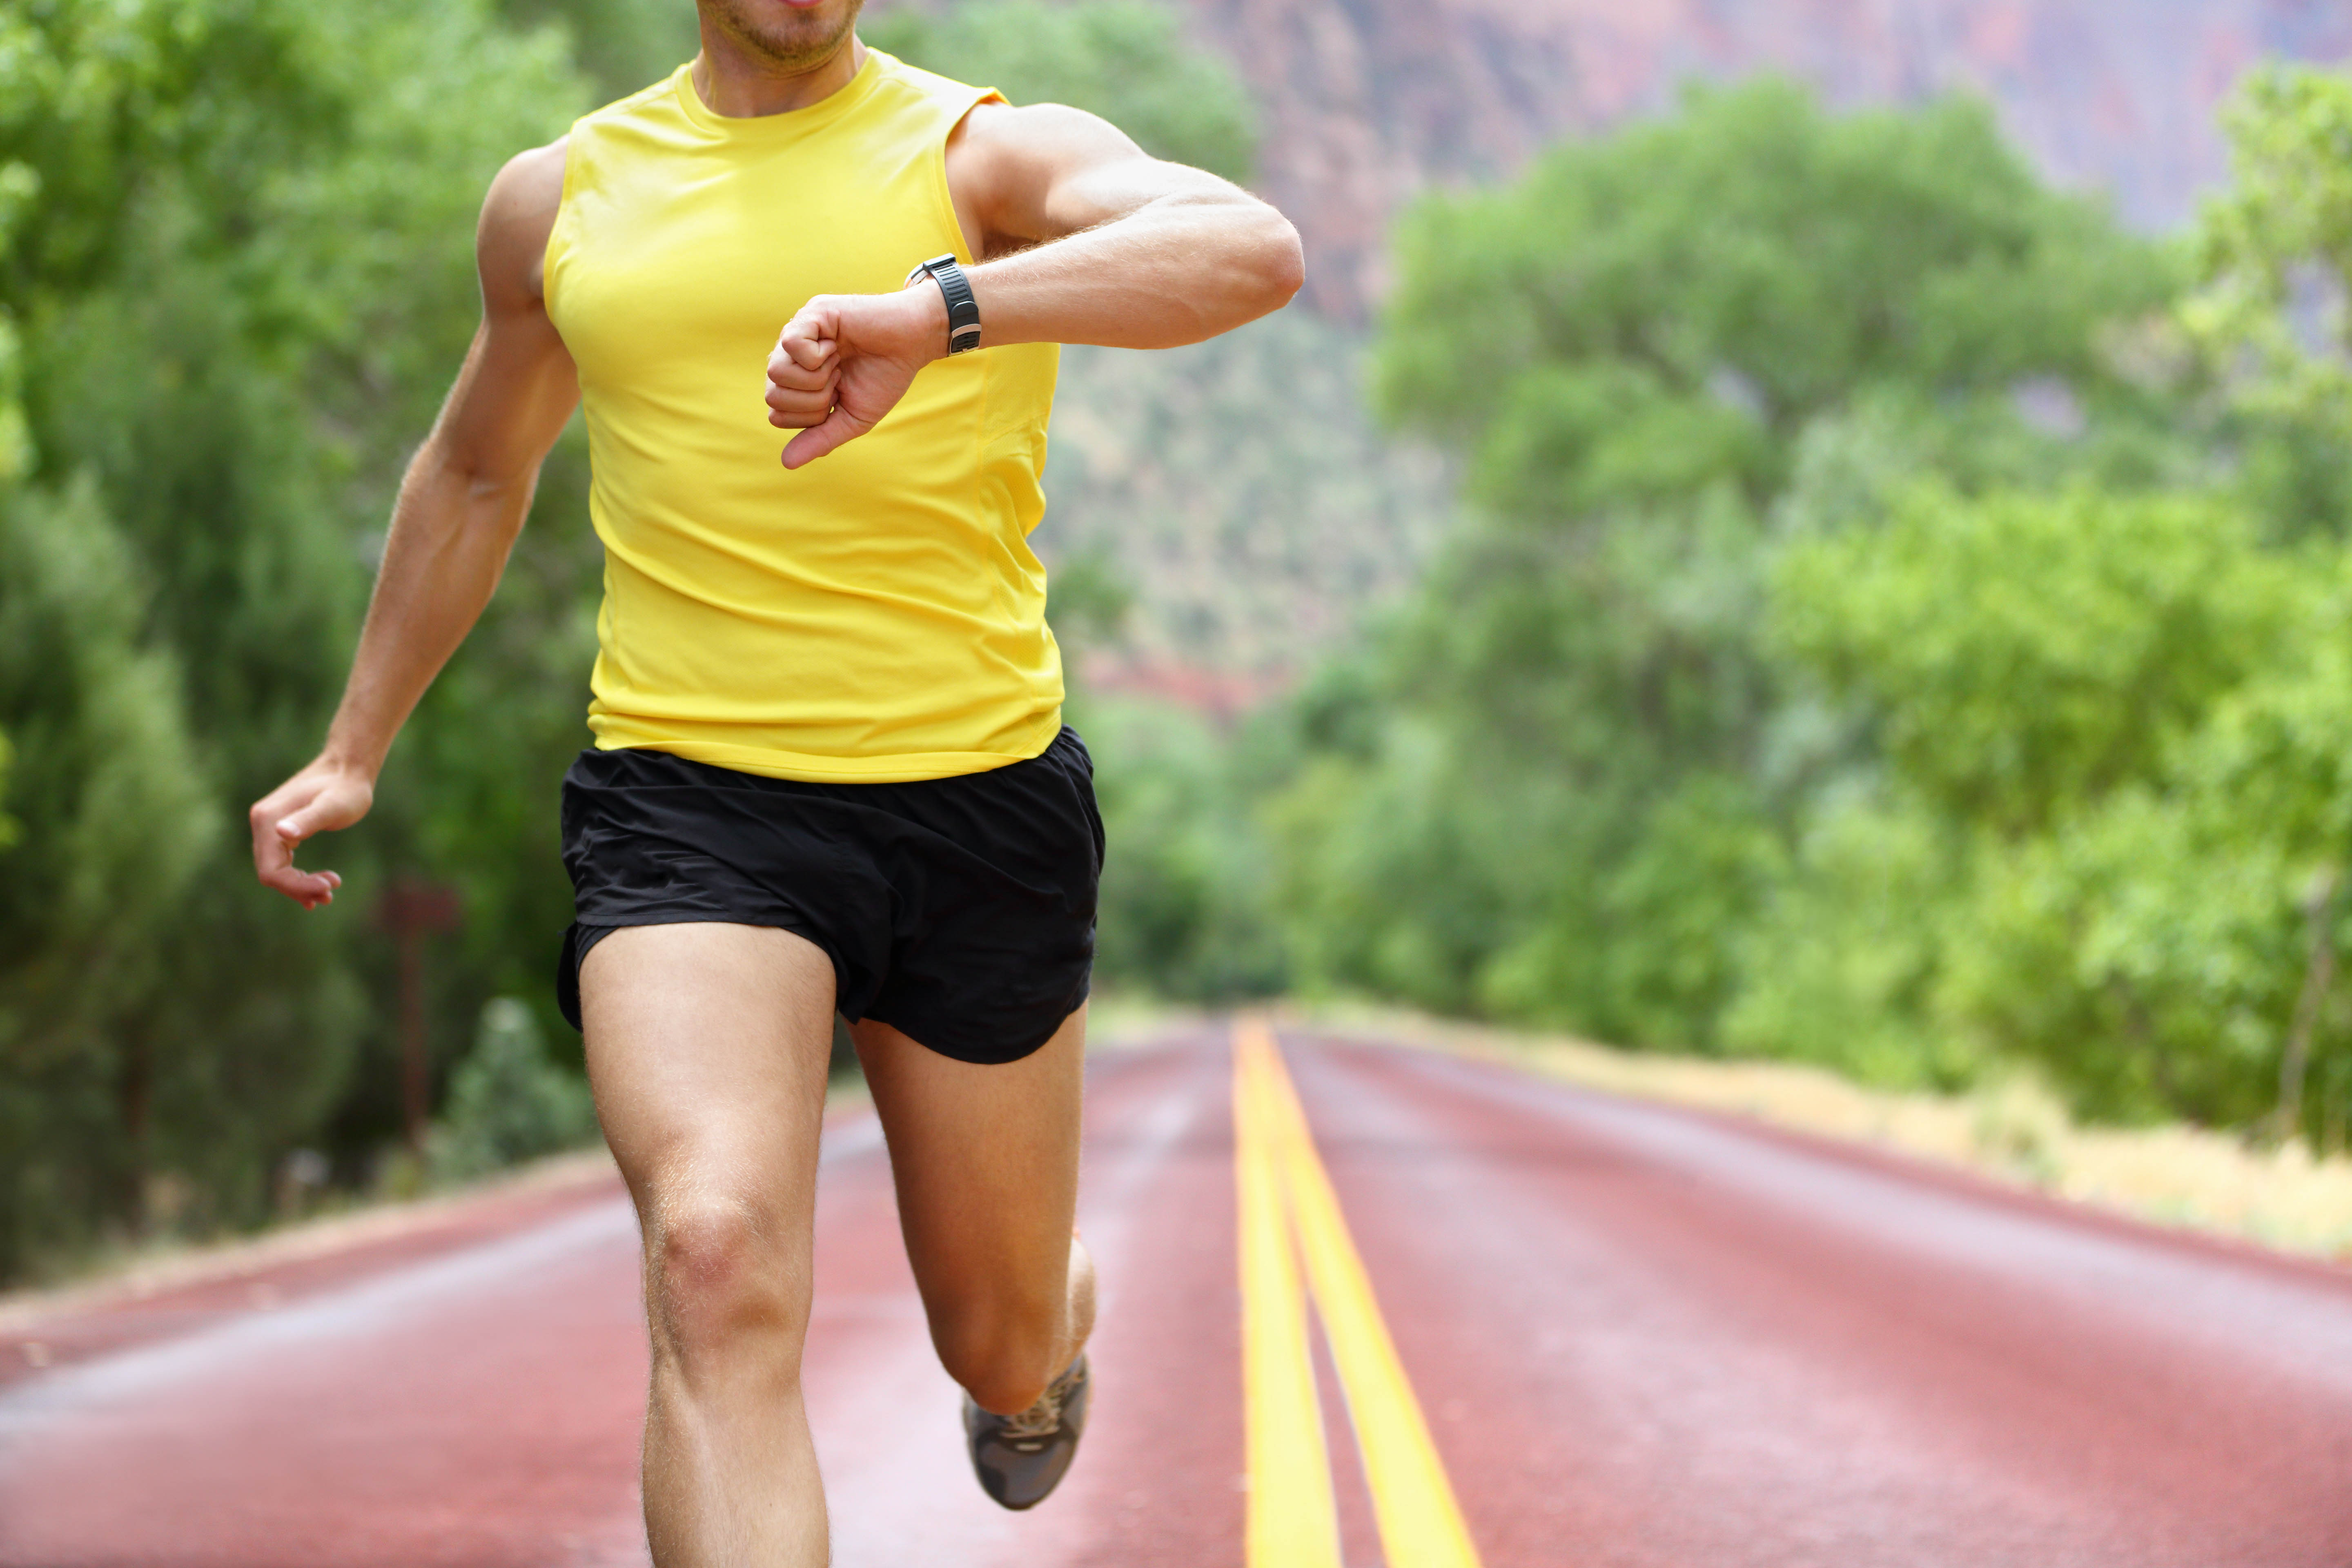 Torso of a fit man in a yellow shirt running on a track, checking his smart watch